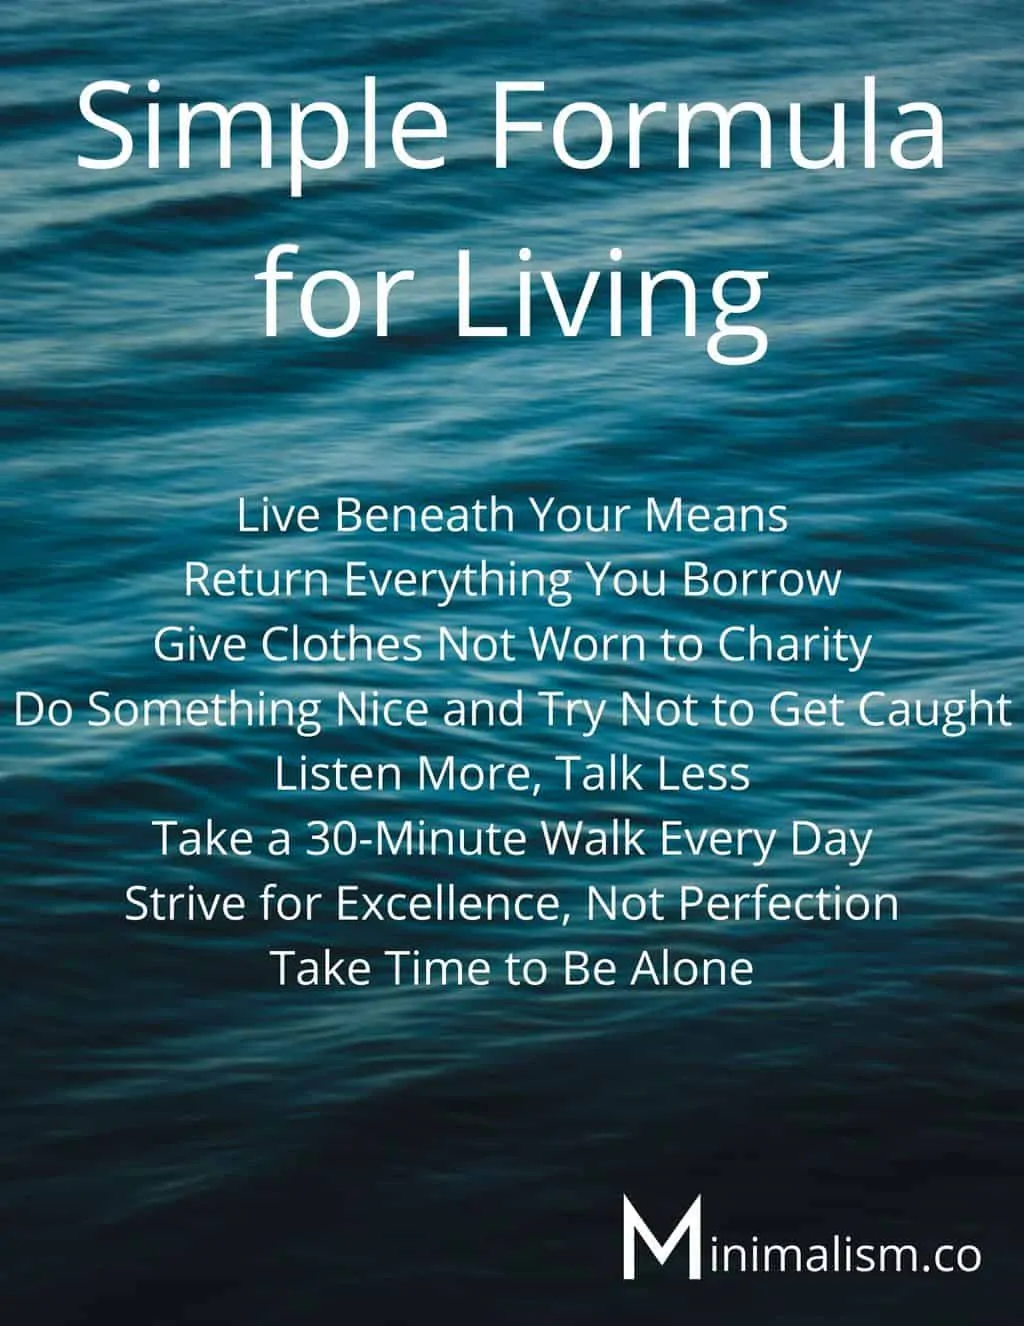 Simple Formula for Living Poster 1